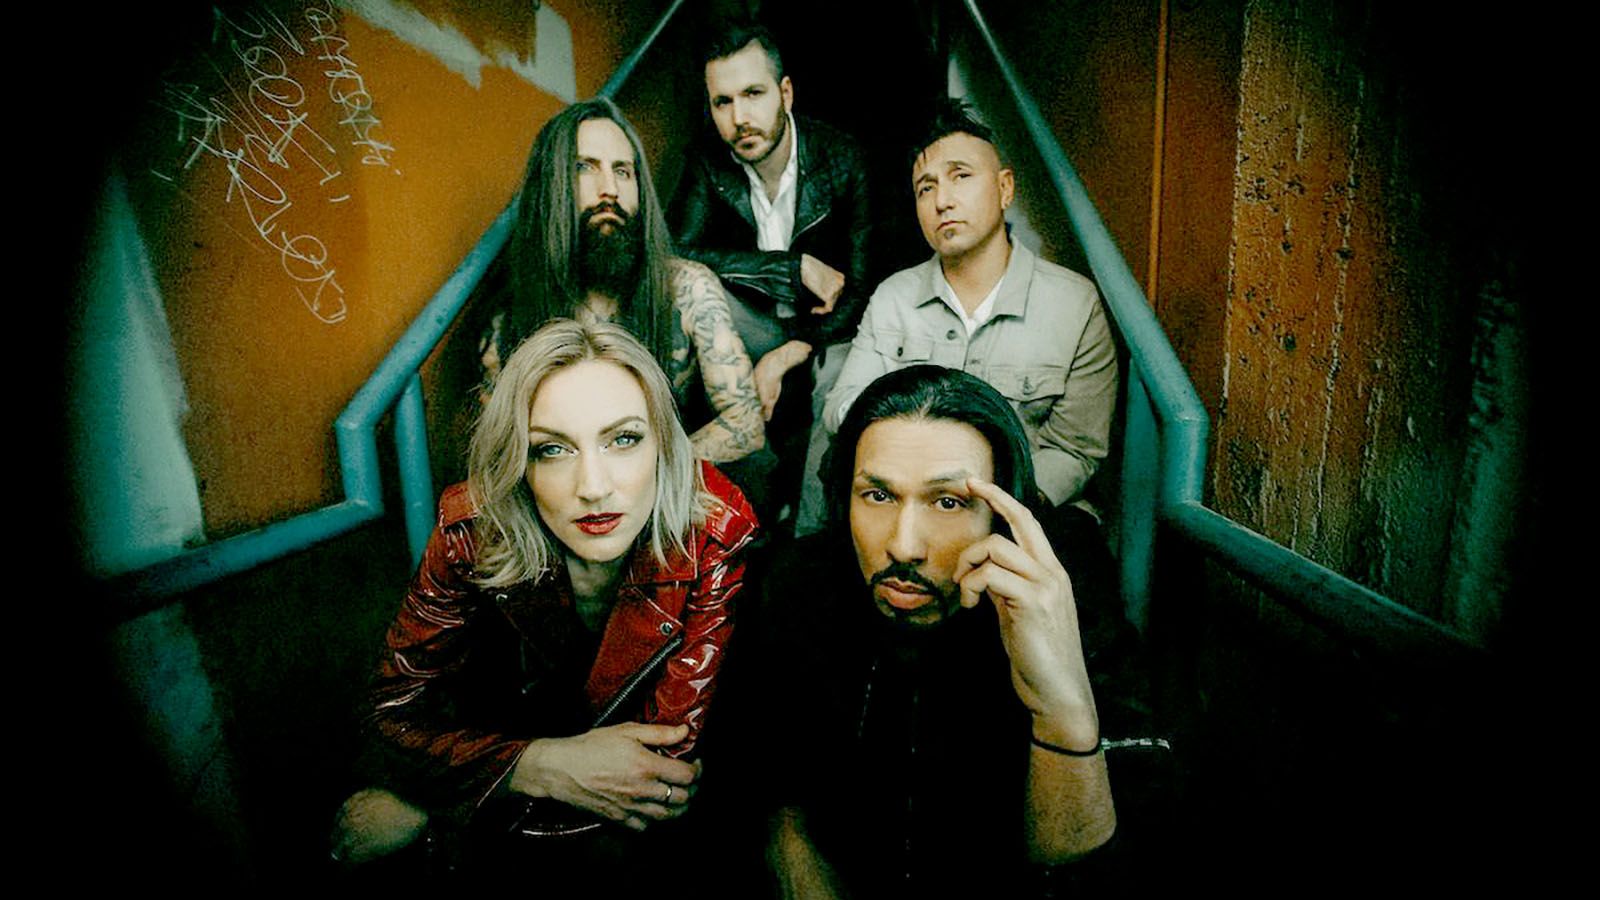 Pop Evil will be at The Eclectic Room in Angola on Wednesday, Nov. 1.